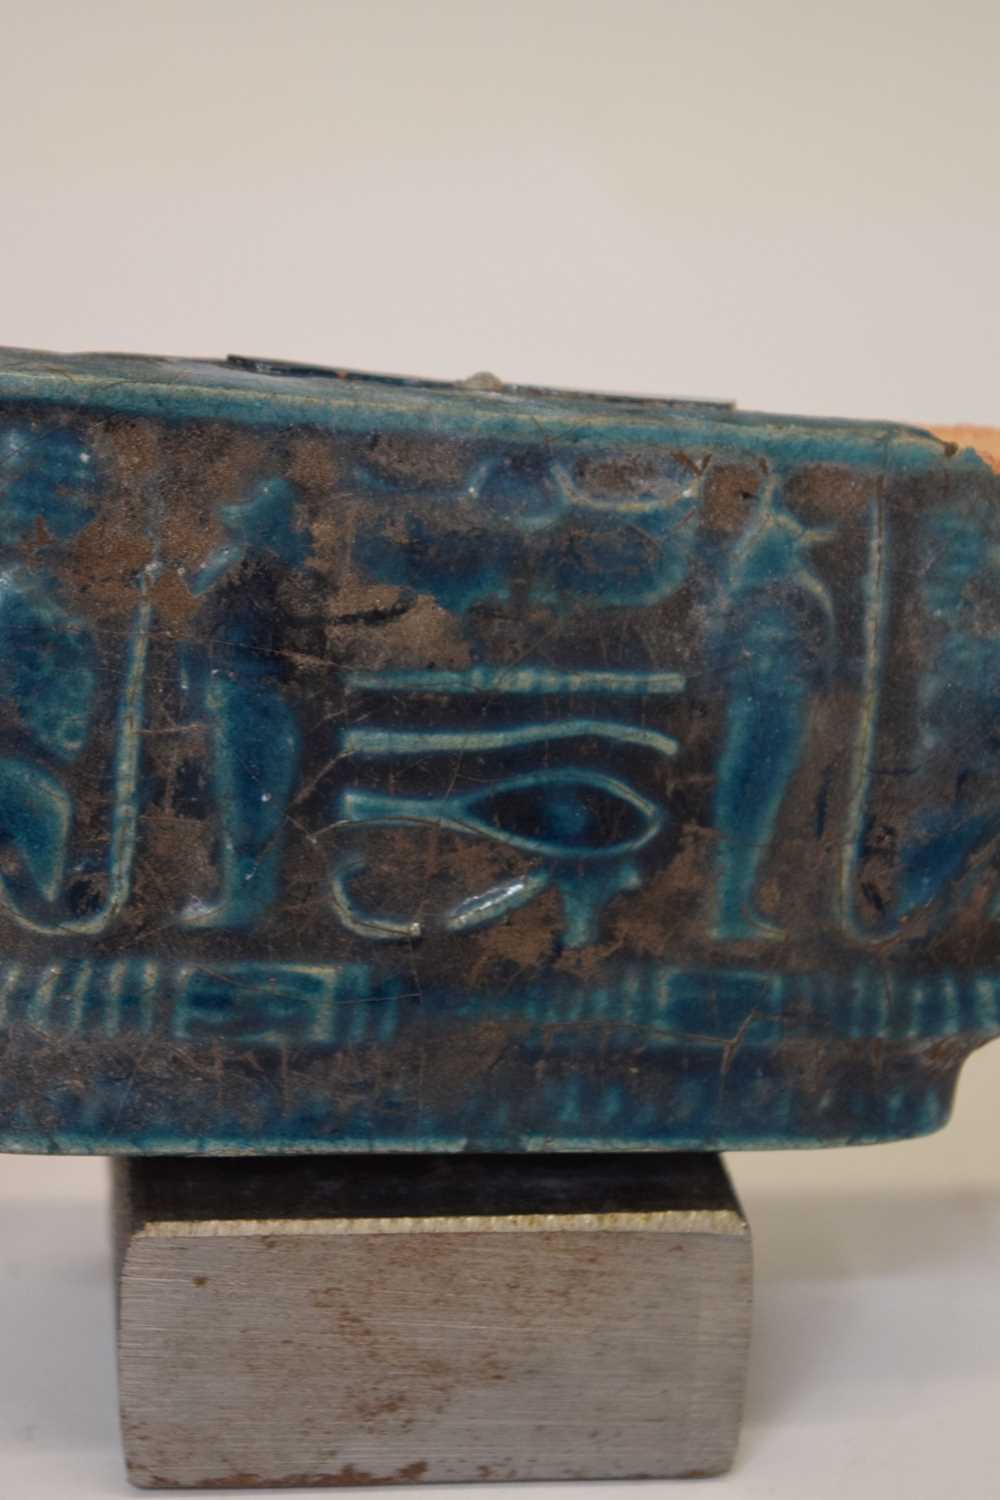 Egyptian faience wolf - Image 5 of 9